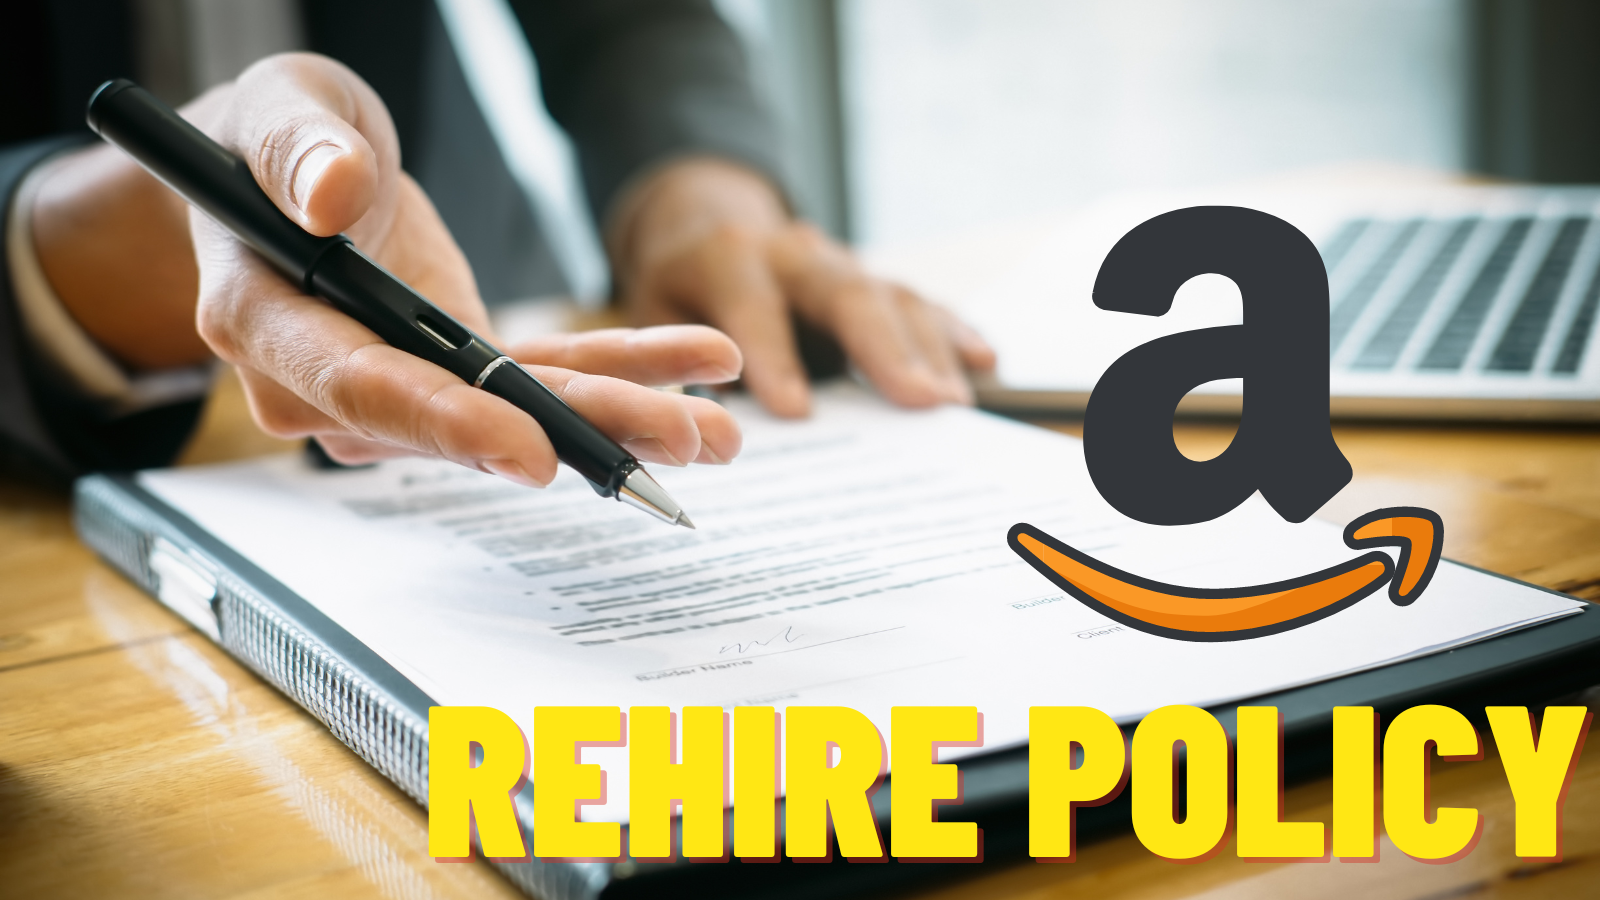 A Complete Guide to Amazon Rehire Policy in 2022